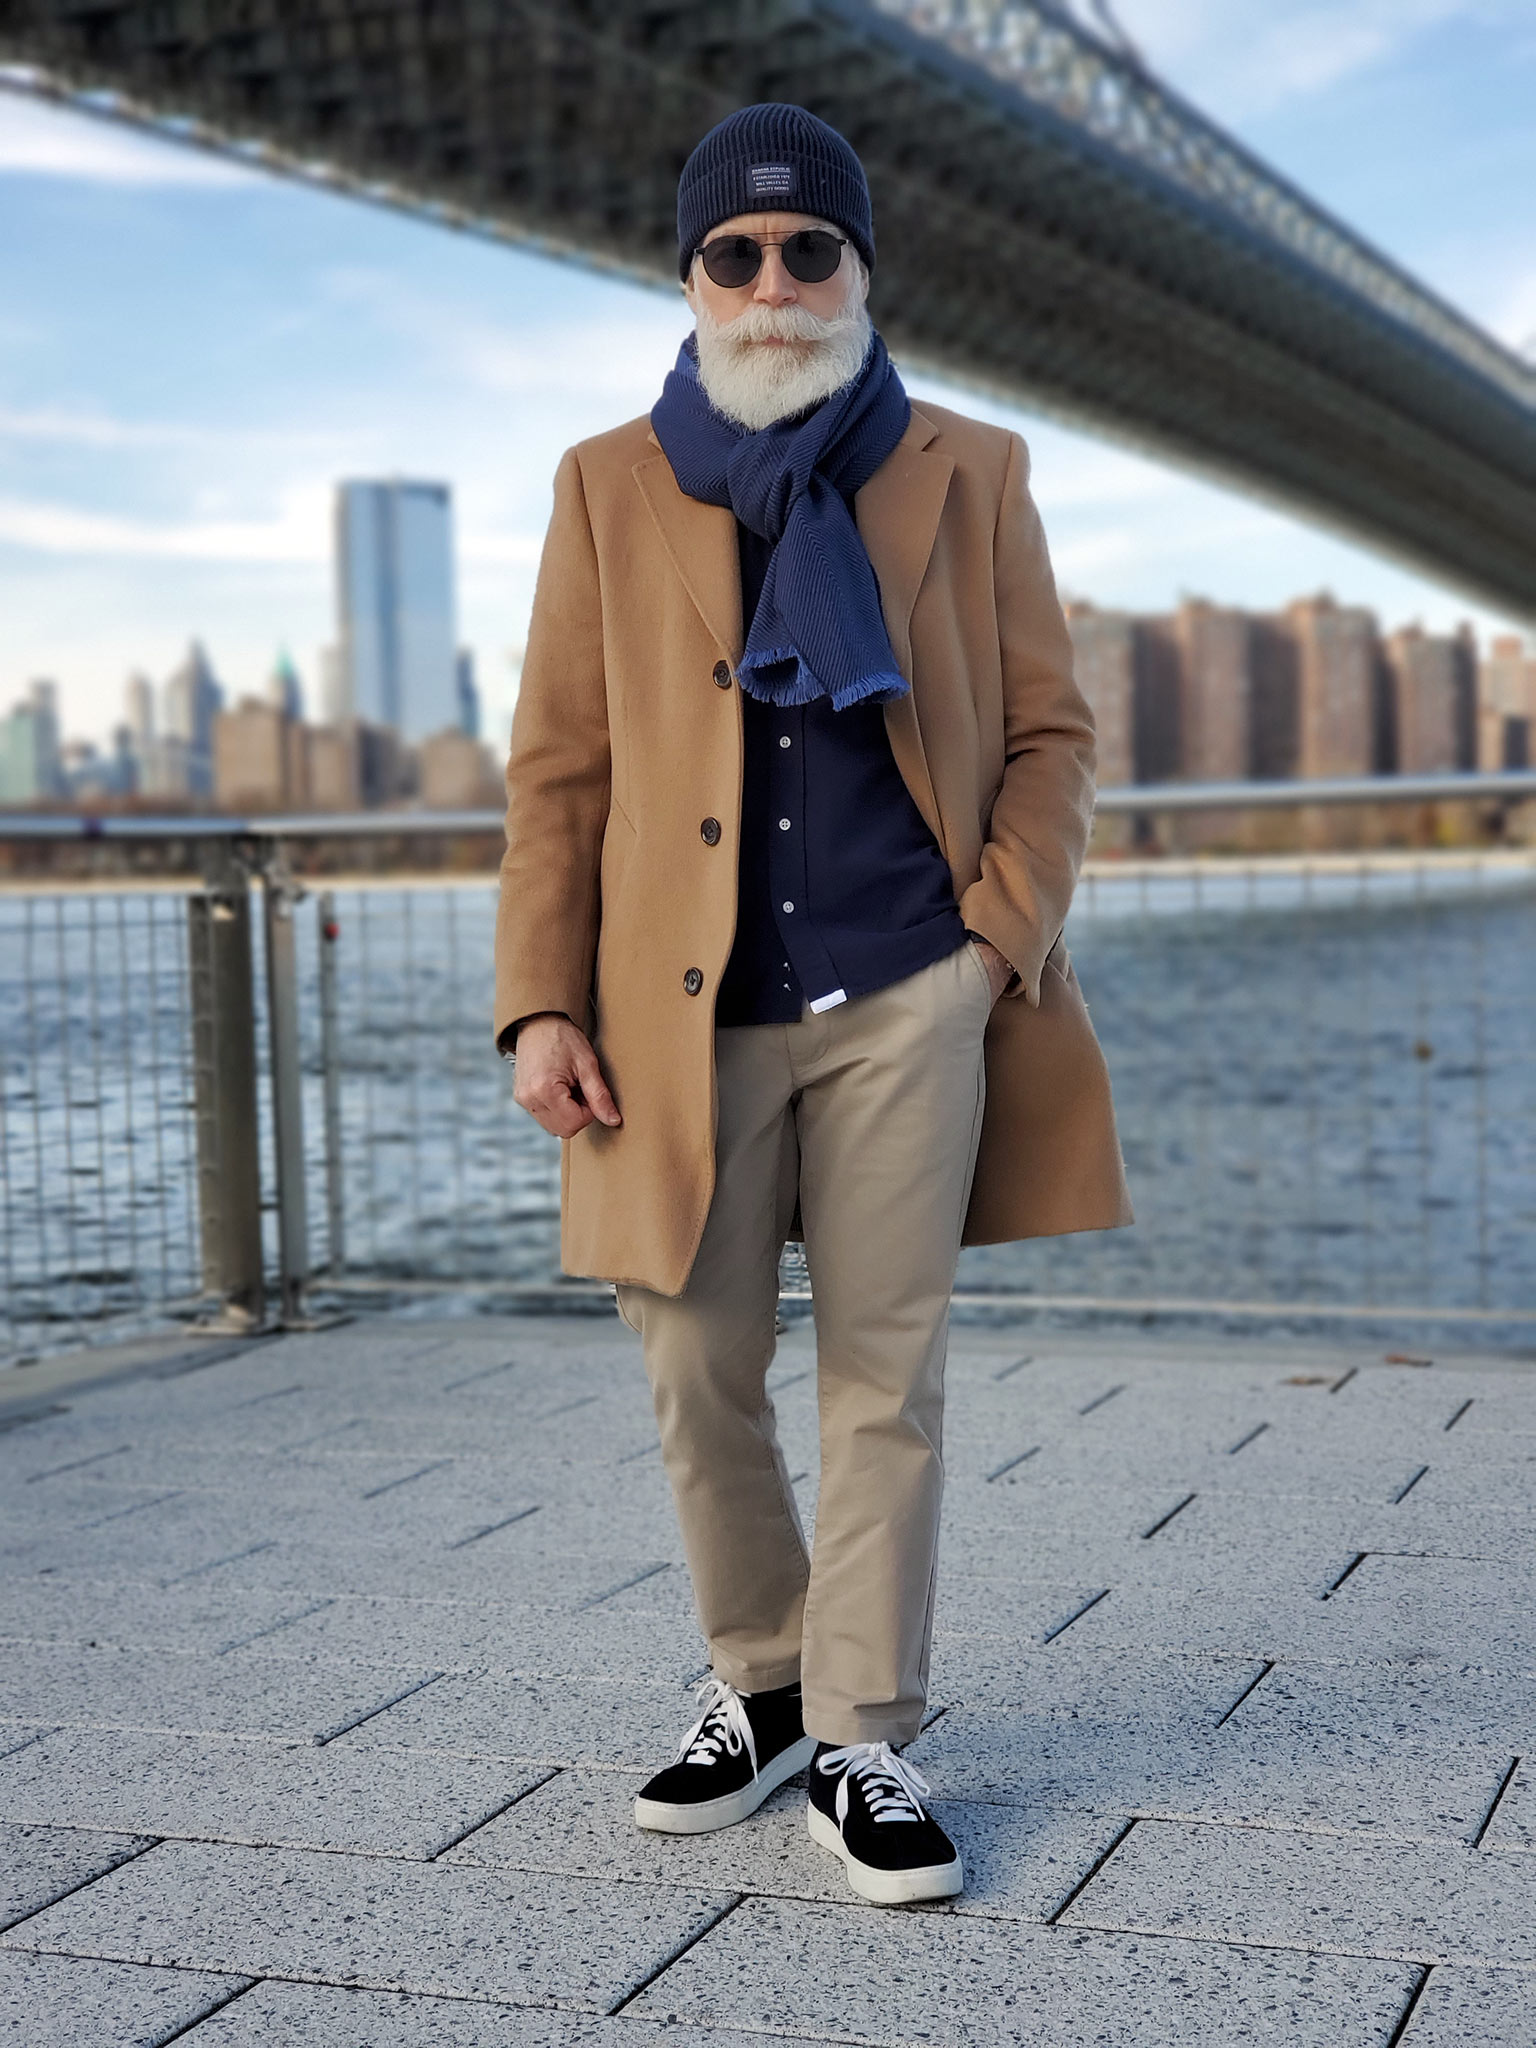 Camel Overcoat, Beanie and Sneakers - The Modest Man